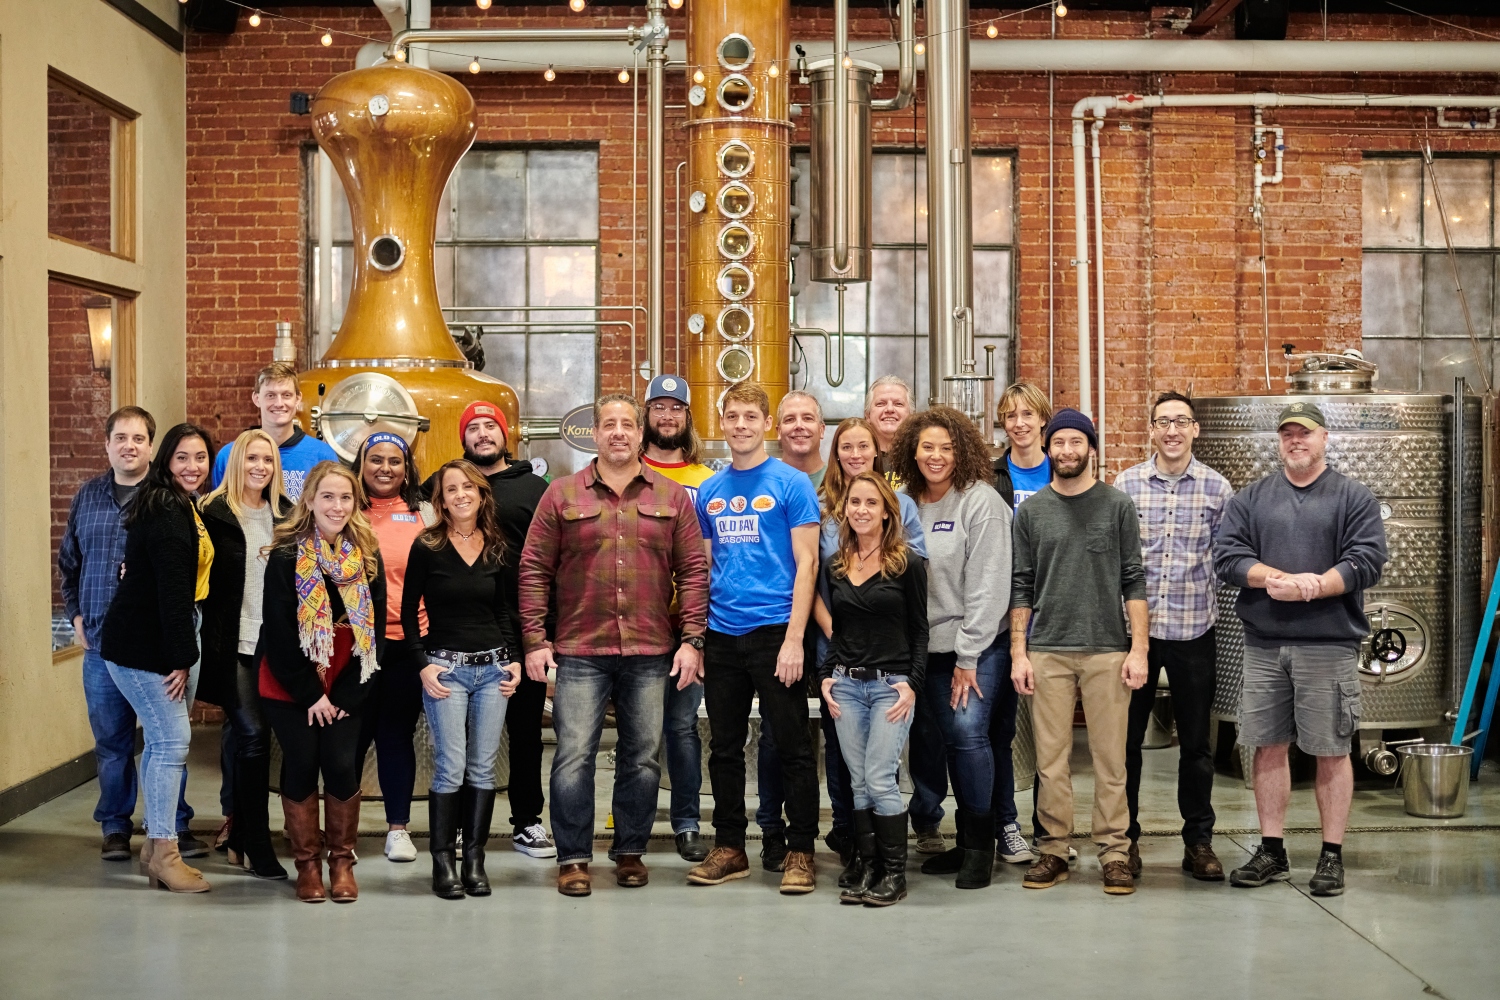 team members from McCormick Spice, McClintock Distilling, Georges Beverage Company